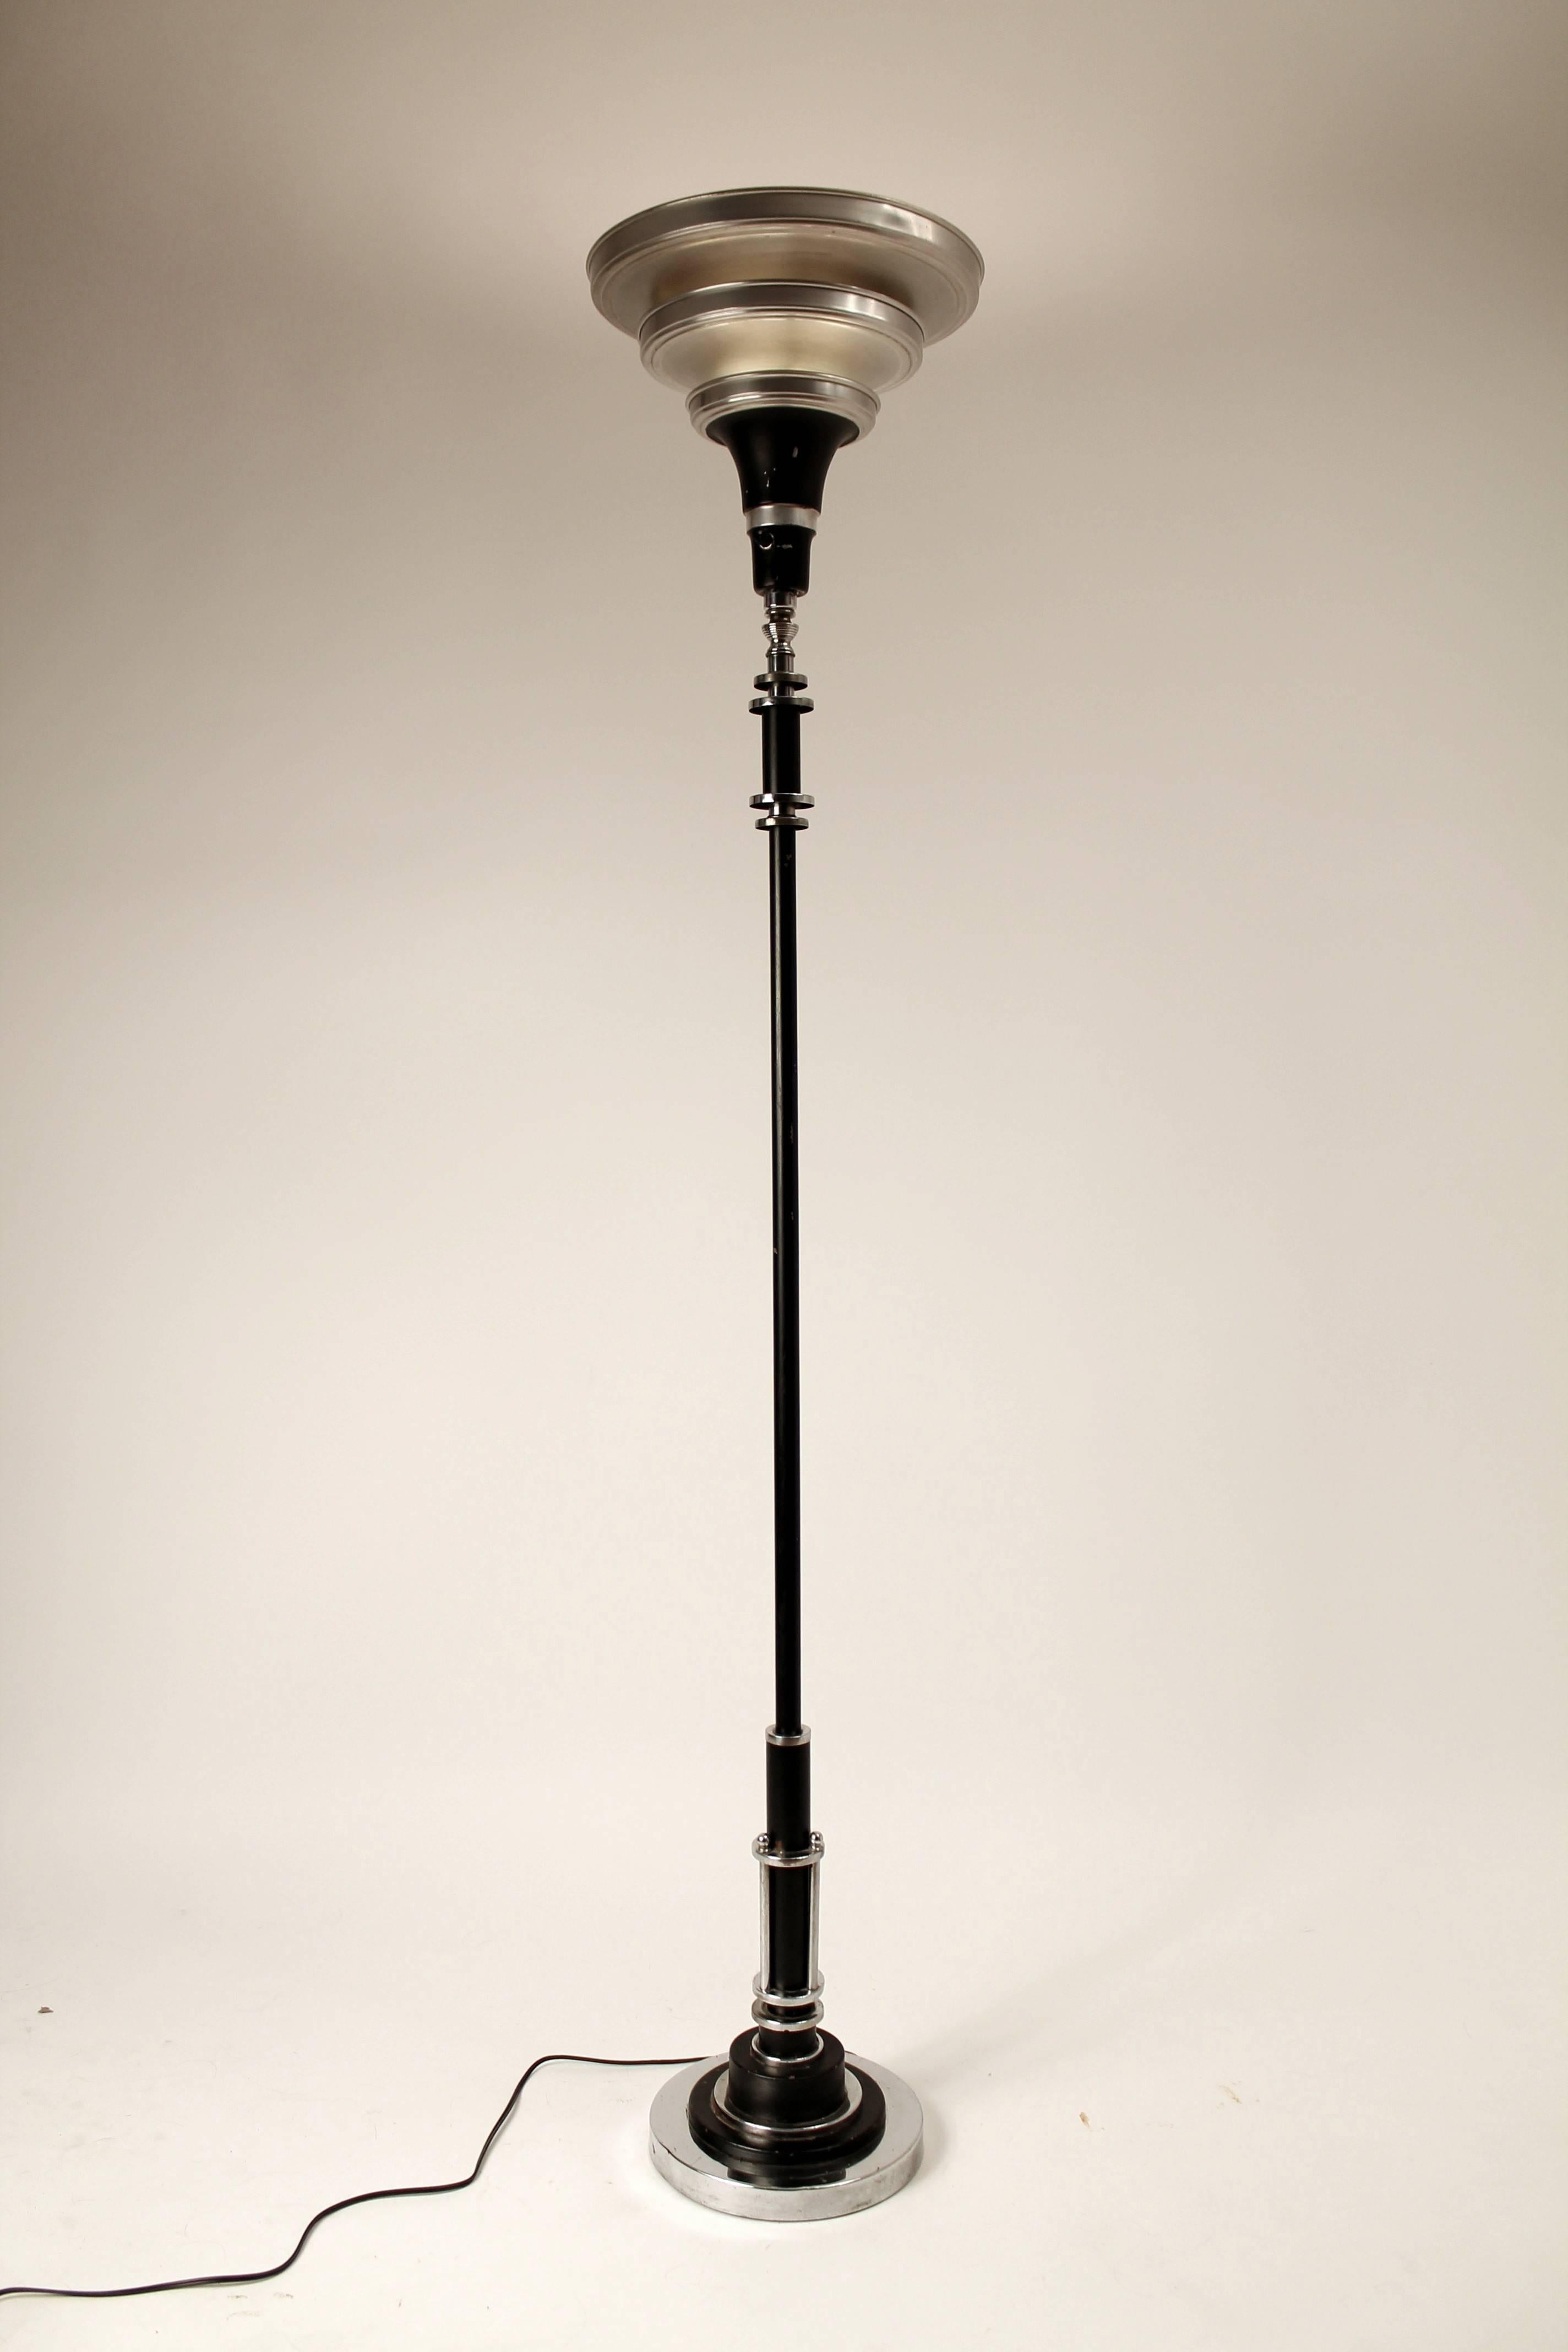 Three-tiered aluminium shade with an enameled stem and base with prime quality chromed accent.

Solid, sturdy construction. 

Rewired, with new regular E26 socket and switch with three level setting.

Measure: 64 inches high.

 